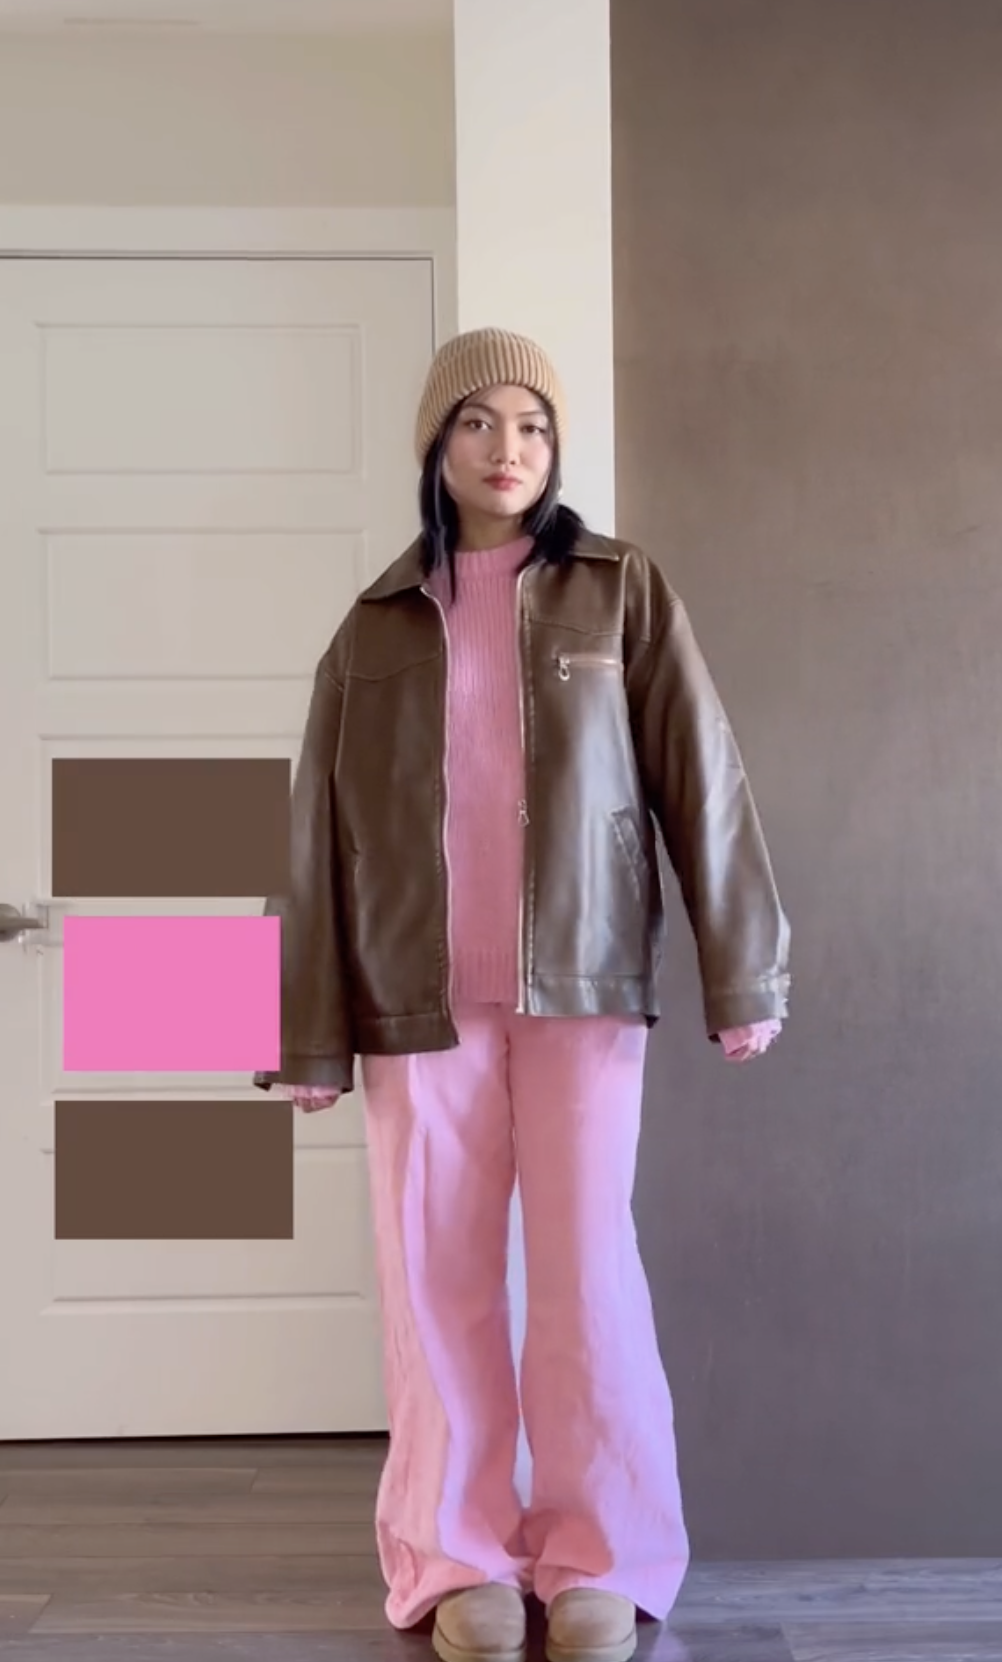 Woman in oversized jacket and wide-leg pants stands indoors, hands slightly extended. A pink square obscures part of the image